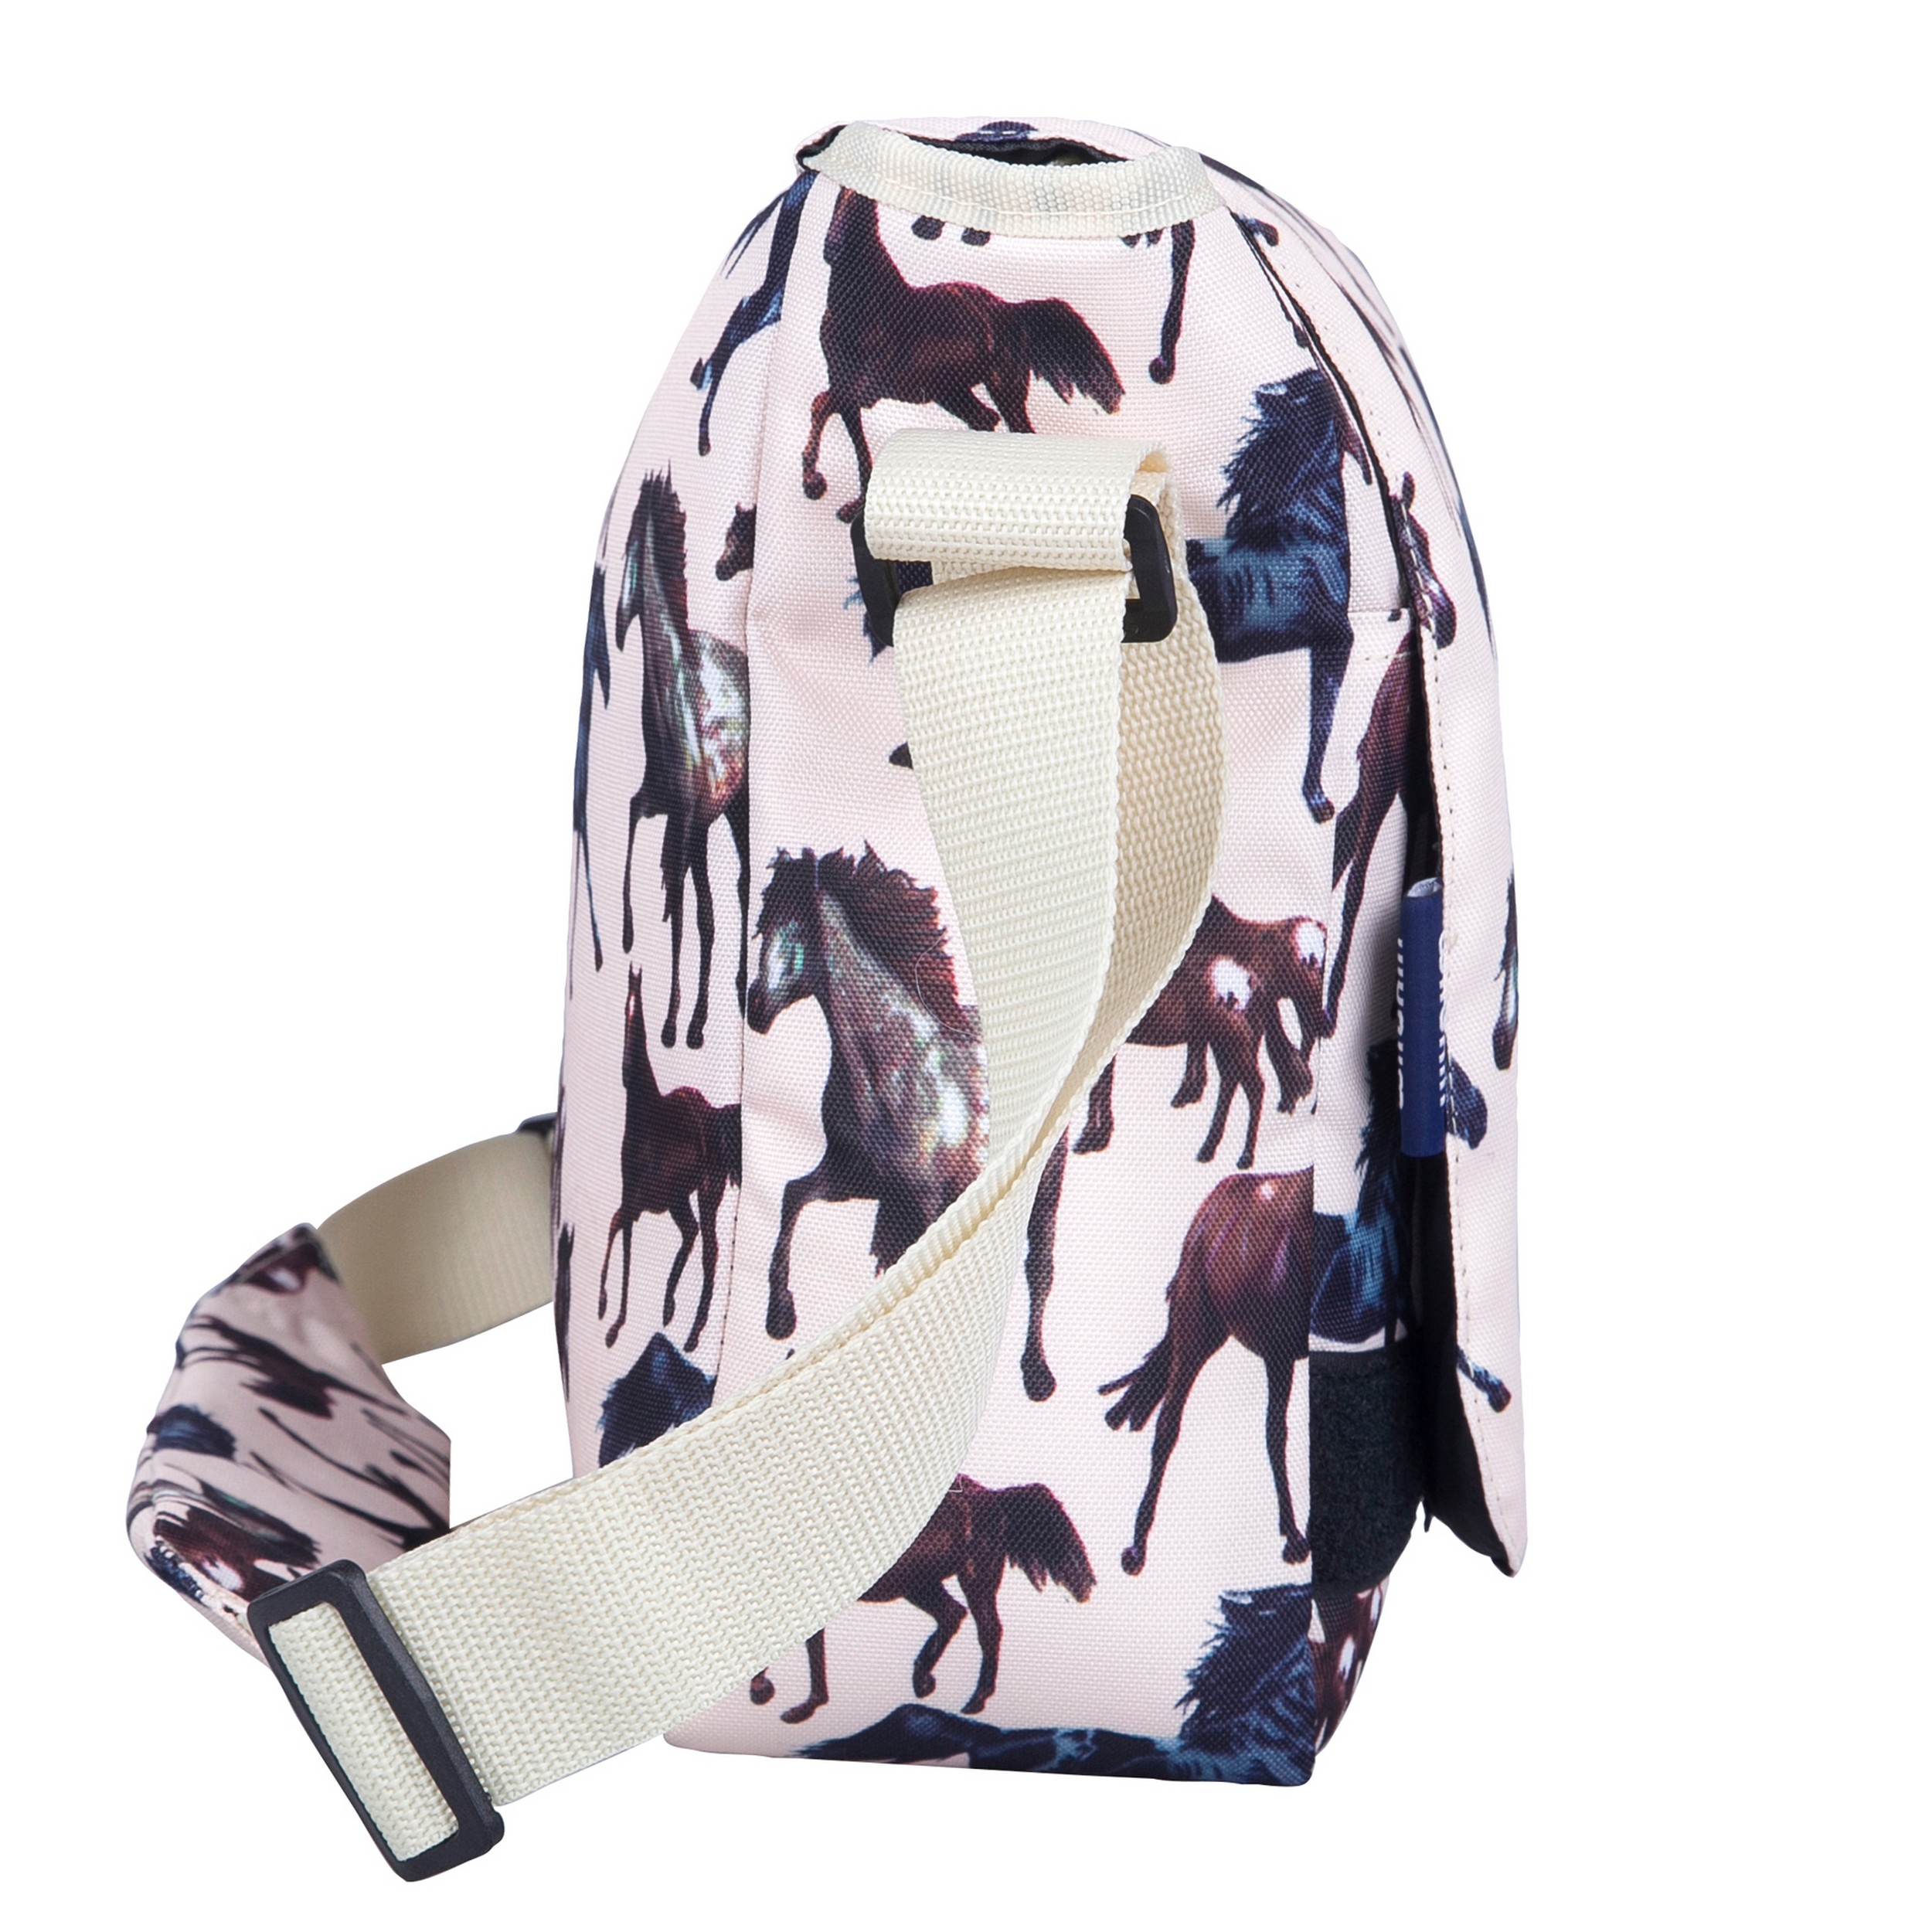 Wildkin Kids Messenger Bag for Girls, Perfect for School or Travel, 13 Inch (Horse Dreams Beige) - image 3 of 7